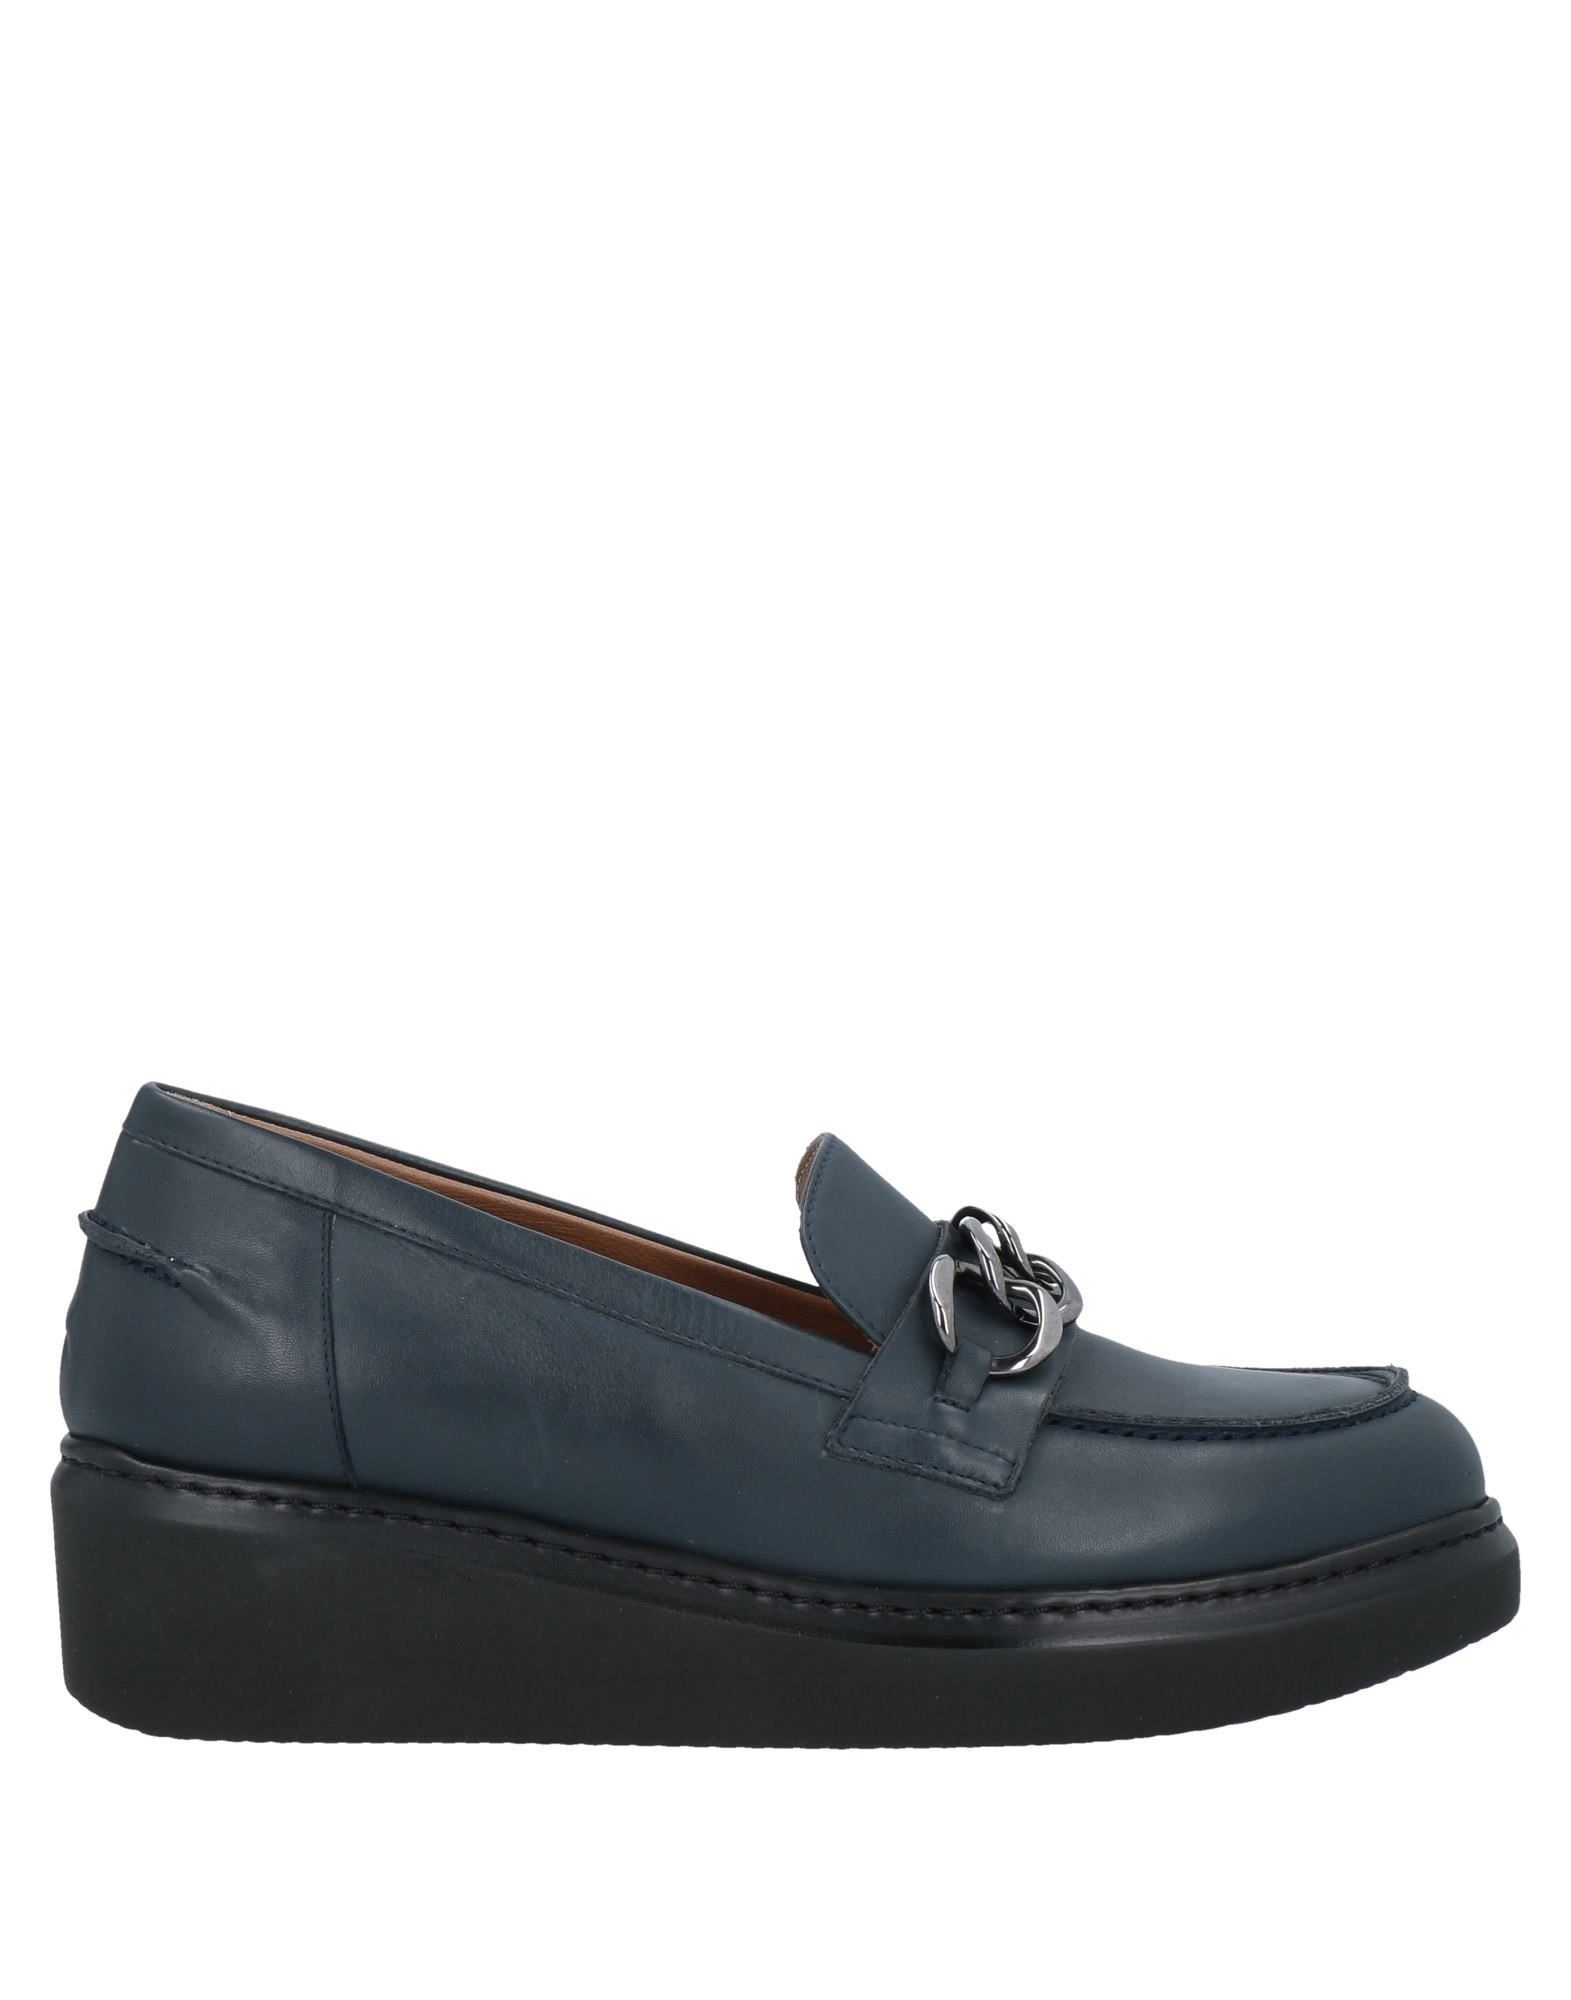 JUST MELLUSO Loafers